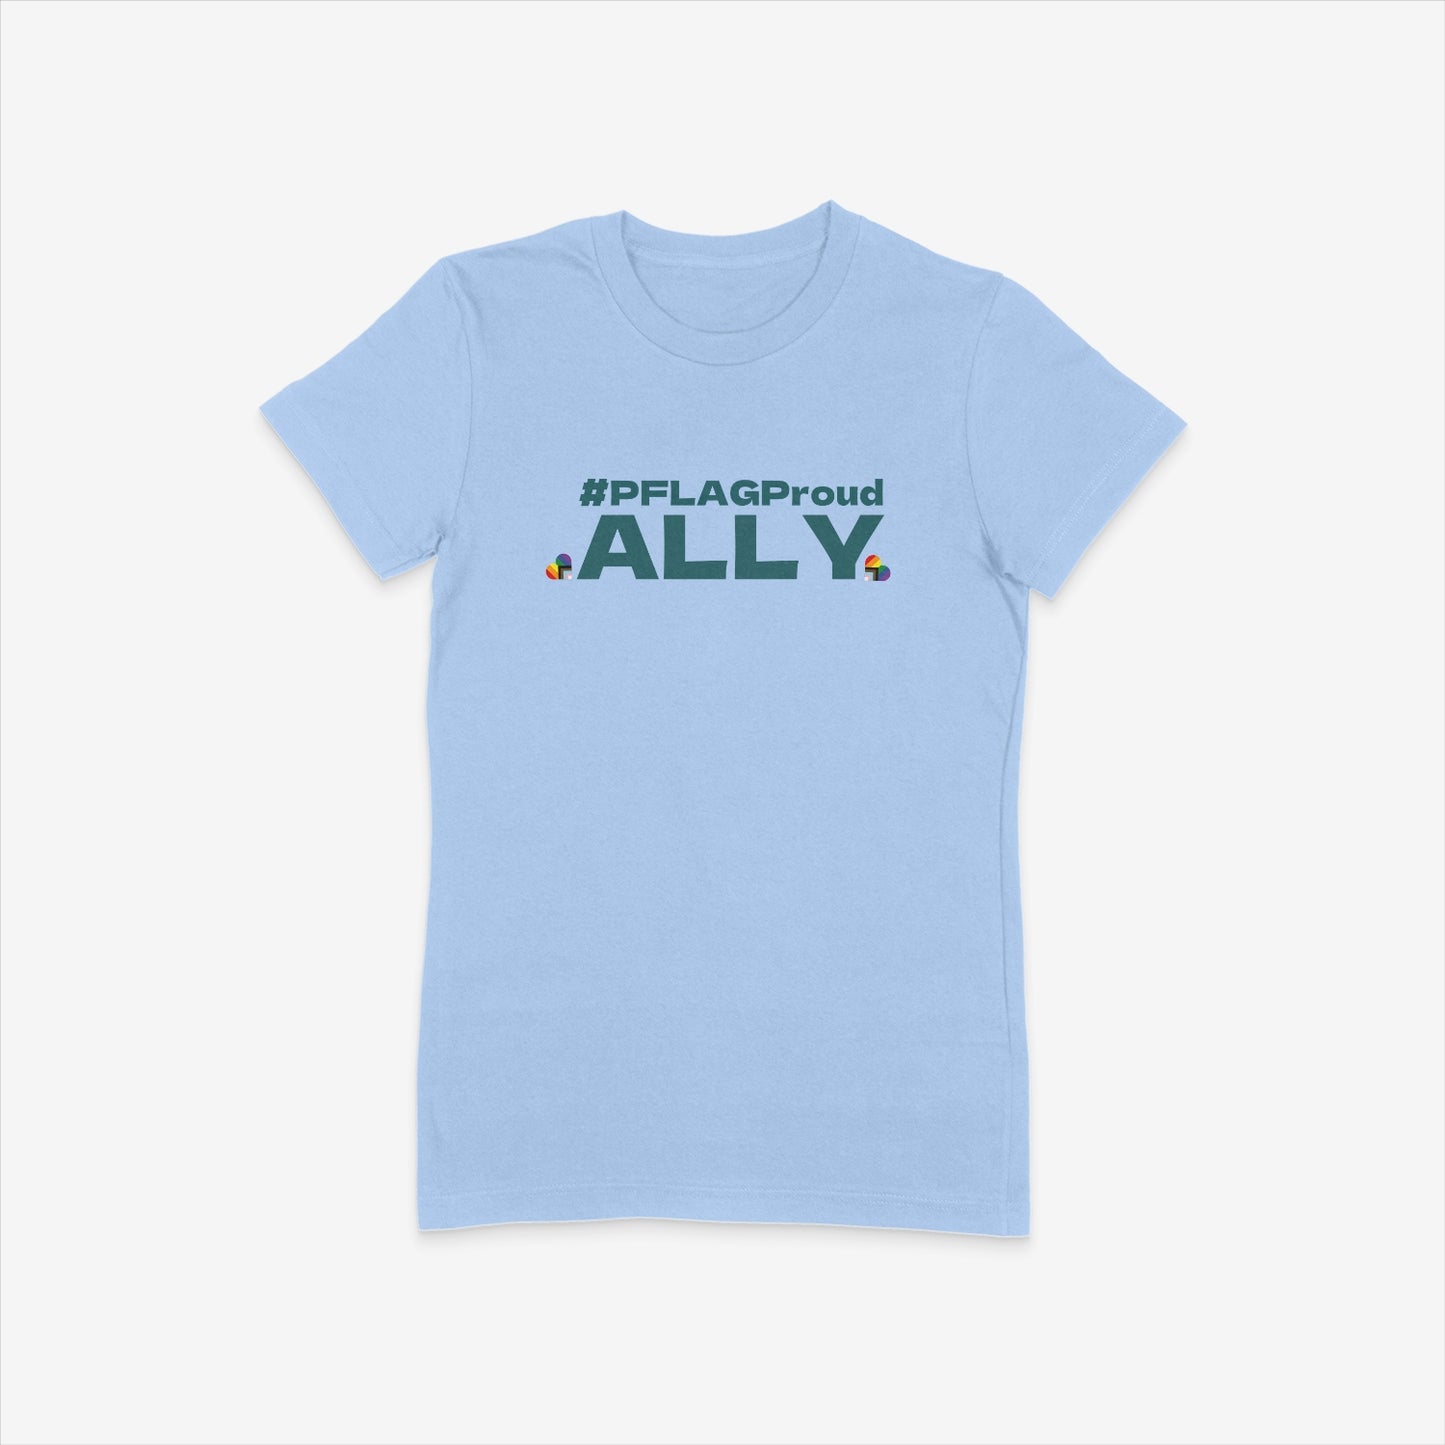 #PFLAGProud Ally - Fitted-Cut Crewneck Short Sleeve T-Shirt